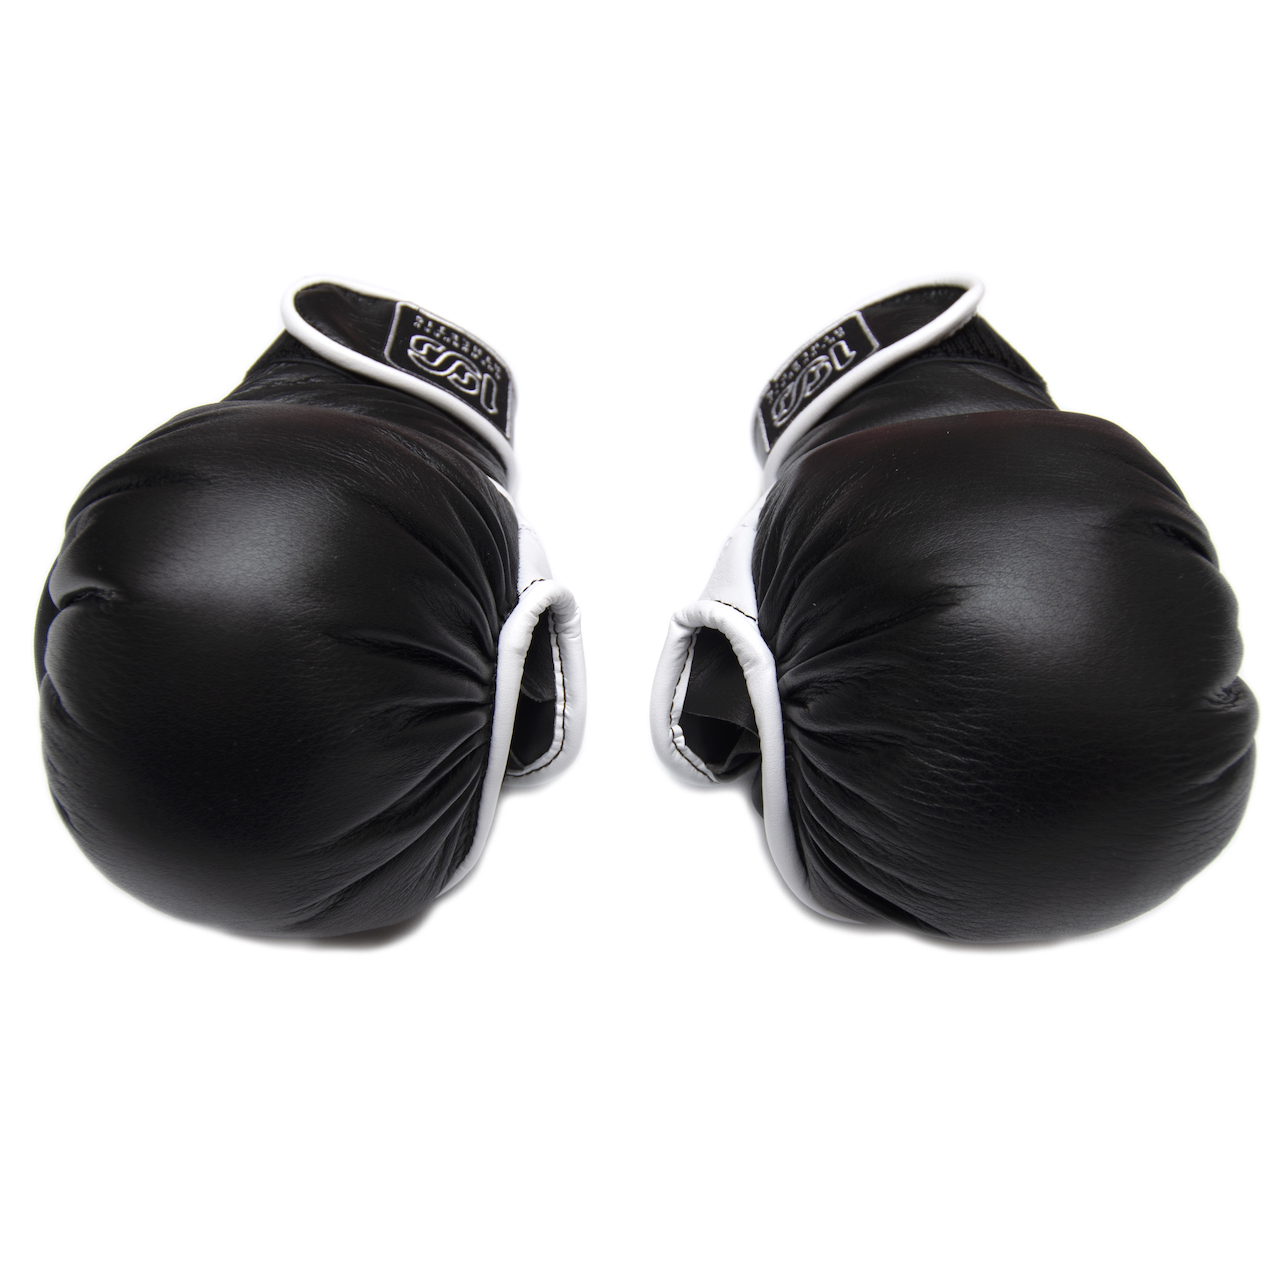 UCS ONLINE STORE / 100A MMA POUNDING GLOVES